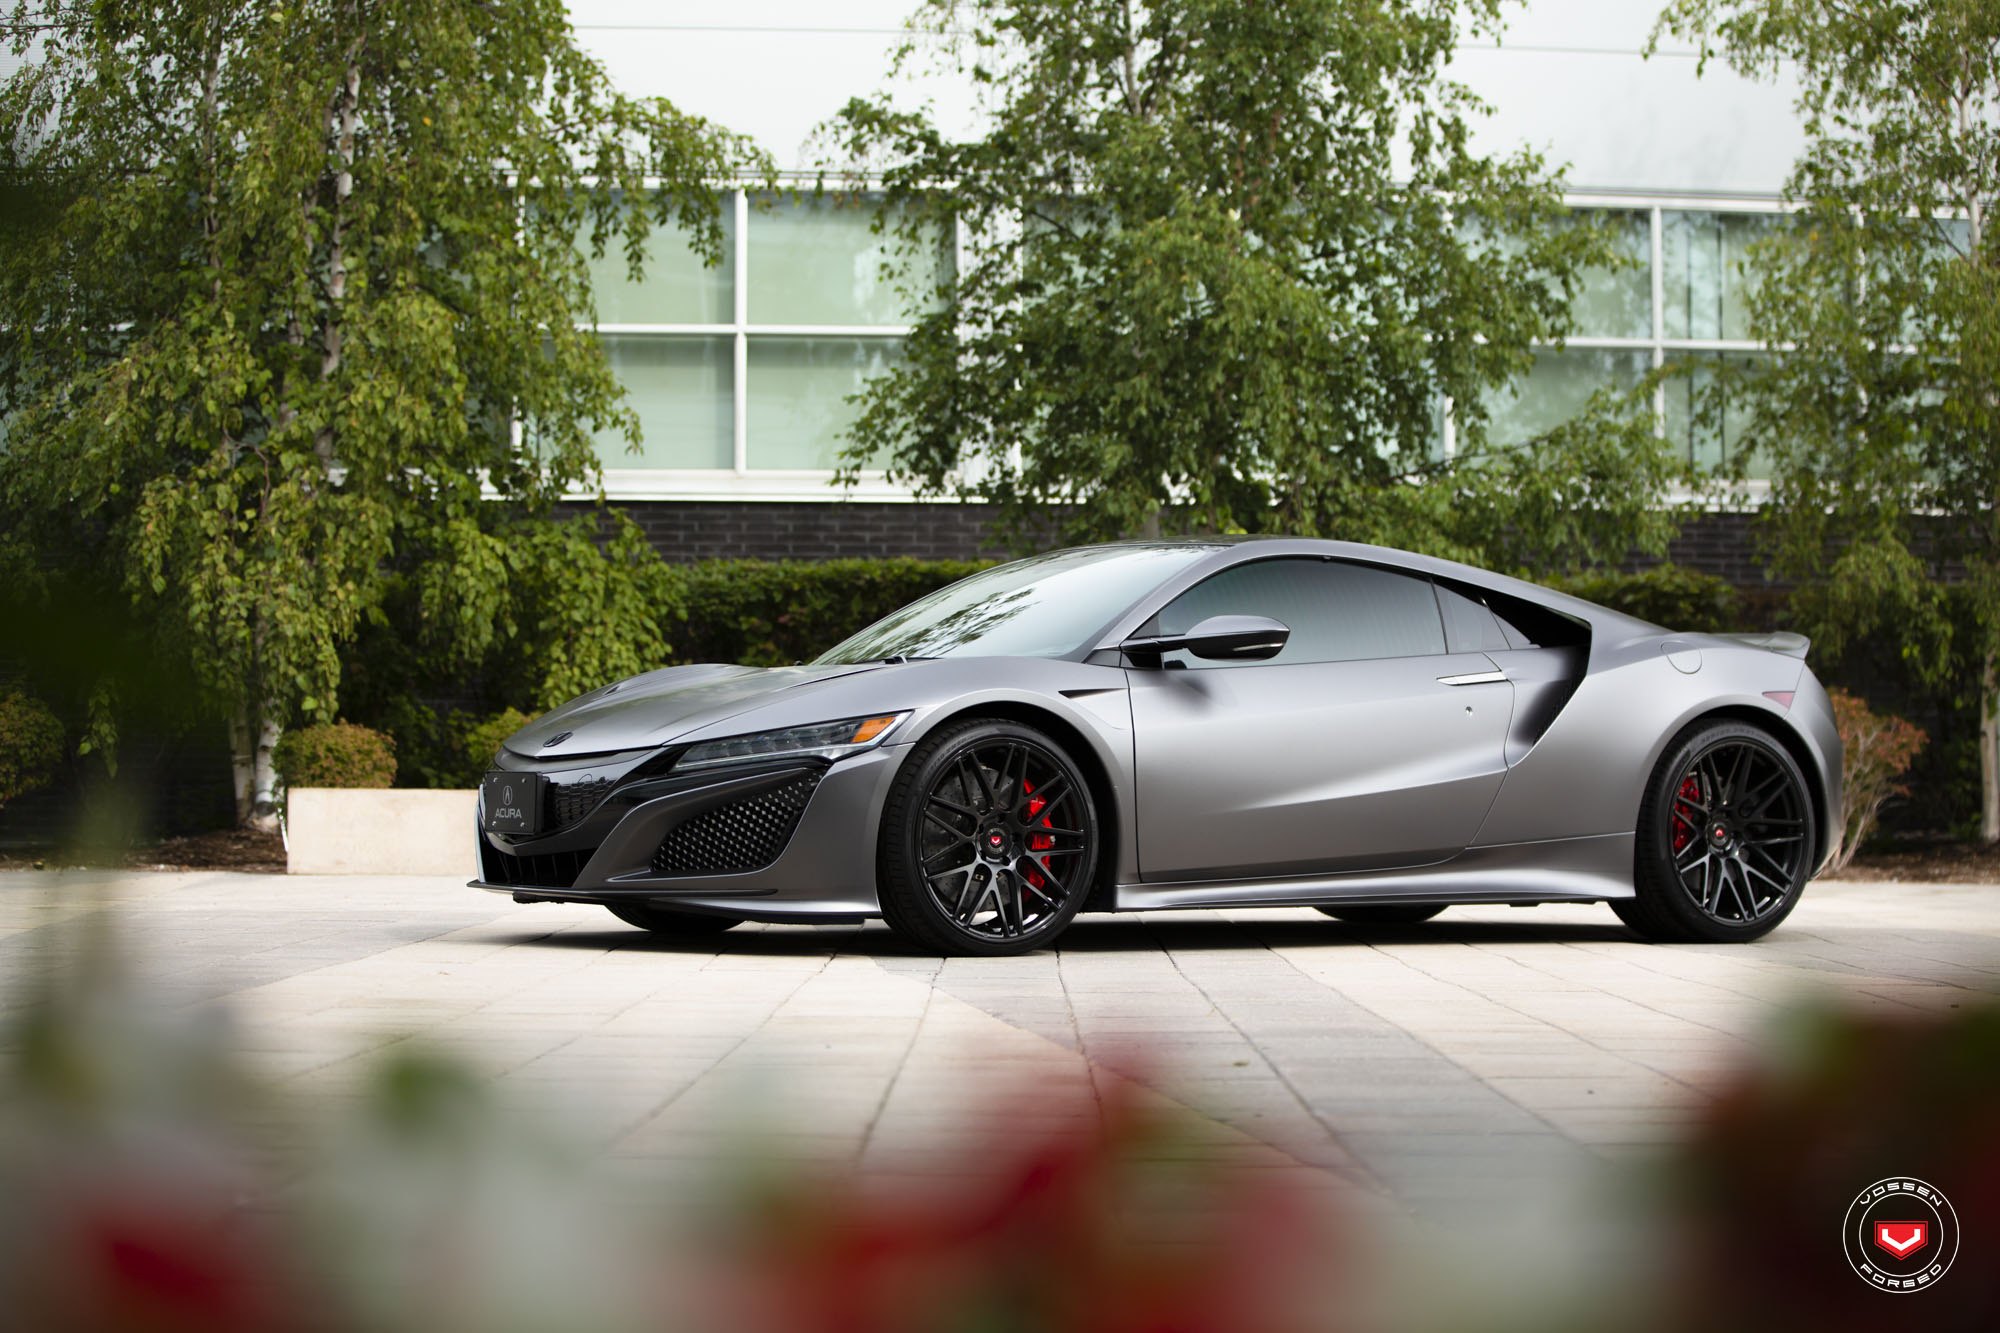 Gray Acura NSX with Aftermarket Side Skirts - Photo by Vossen